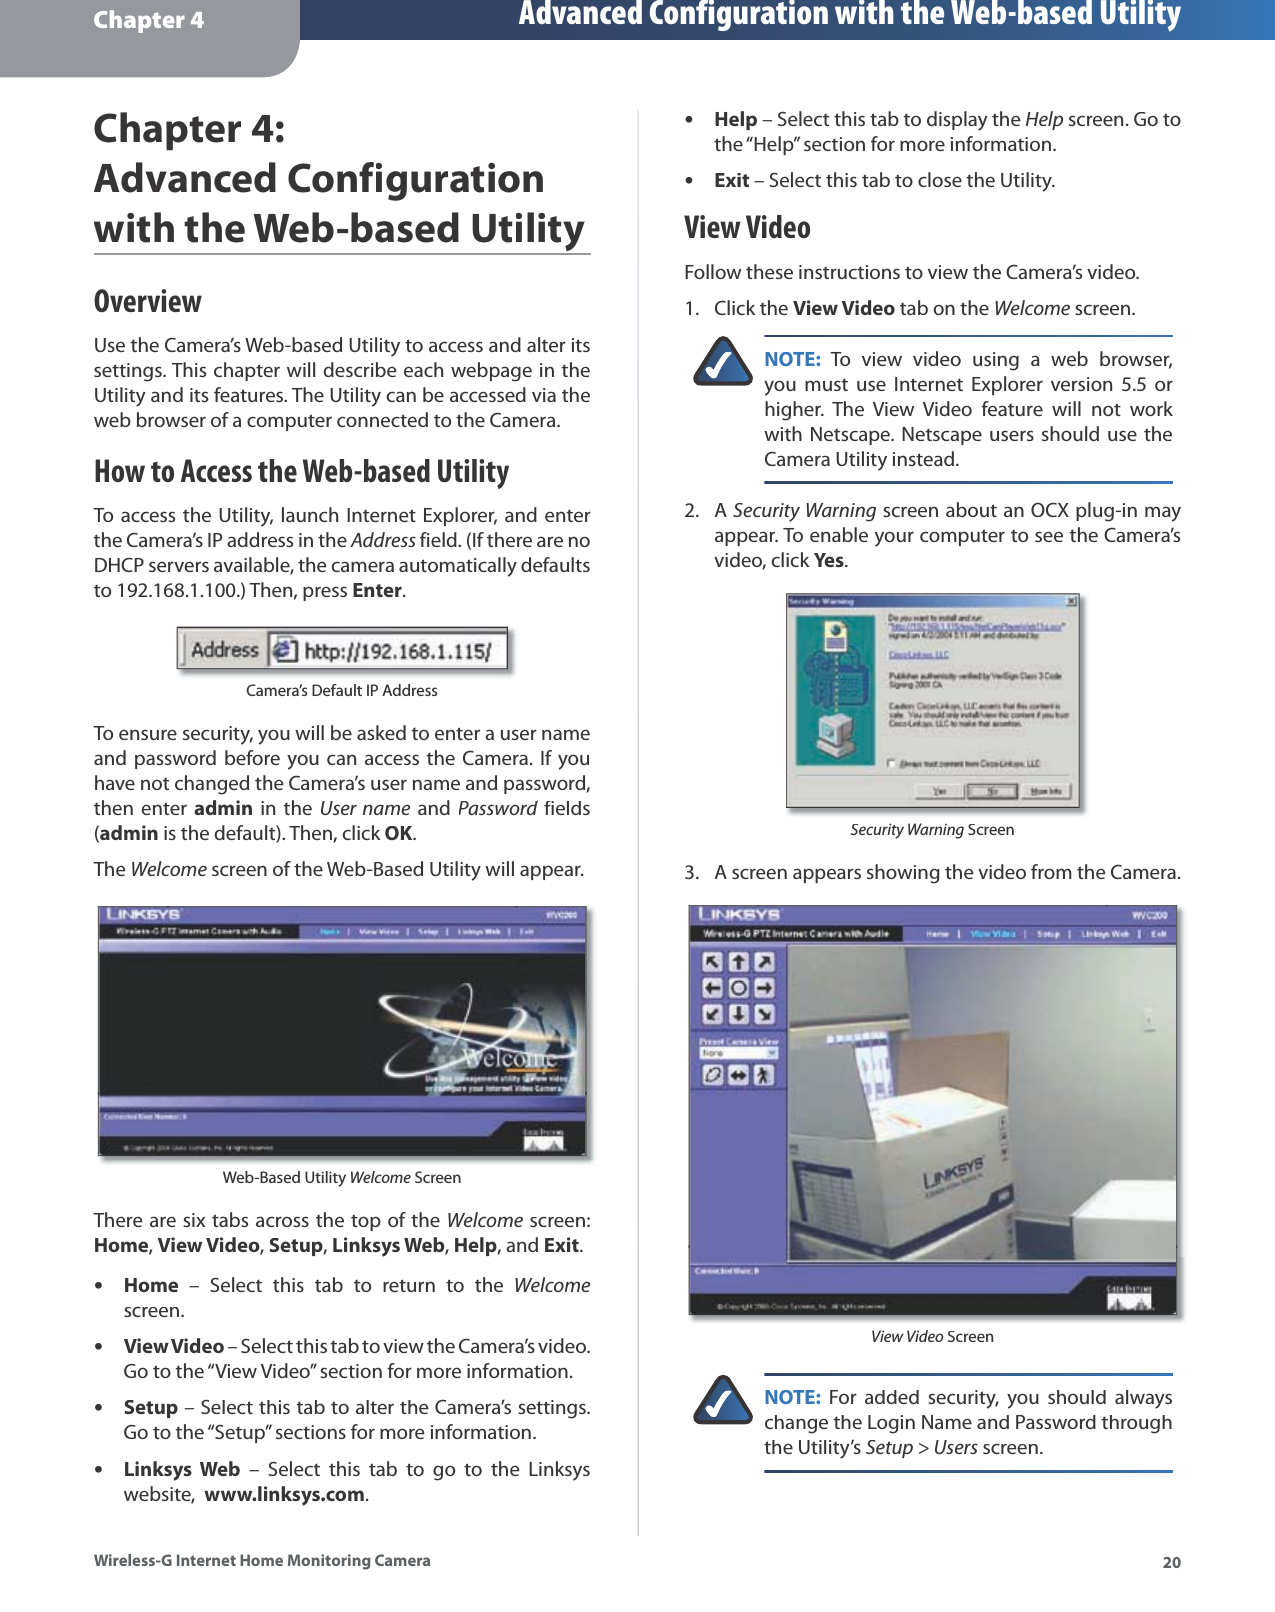 Chapter 4 Advanced Configuration with the Web-based Utility20Wireless-G Internet Home Monitoring CameraChapter4:Advanced Configurationwith the Web-based UtilityOverviewUse the Camera’s Web-based Utility to access and alter its settings. This chapter will describe each webpage in the Utility and its features. The Utility can be accessed via theweb browser of a computer connected to the Camera.How to Access the Web-based UtilityTo access the Utility, launch Internet Explorer, and enter the Camera’s IP address in theAddress field. (If there are no DHCP servers available, the camera automatically defaults to 192.168.1.100.) Then, pressEnter.Camera’s Default IP AddressTo ensure security, you will be asked to enter a user name and password before you can access the Camera. If you have not changed the Camera’s user name and password, then enter admin in theUser name andPassword fieldsd(admin is the default). Then, click OK.TheWelcome screen of the Web-Based Utility will appear. Web-Based Utility Welcome ScreenThere are six tabs across the top of the Welcome screen:Home,View Video,Setup,Linksys Web,Help, andExit.Home – Select this tab to return to the Welcomescreen.View Video – Select this tab to view the Camera’s video. Go to the “View Video” section for more information.Setup – Select this tab to alter the Camera’s settings. Go to the “Setup” sections for more information.Linksys Web – Select this tab to go to the Linksyswebsite,  www.linksys.com.••••Help – Select this tab to display theHelp screen. Go tothe “Help” section for more information.Exit – Select this tab to close the Utility.View VideoFollow these instructions to view the Camera’s video.Click the View Video tab on theWelcome screen.NOTE:To view video using a web browser, you must use Internet Explorer version 5.5 or higher. The View Video feature will not work with Netscape. Netscape users should use the Camera Utility instead.ASecurity Warning screen about an OCX plug-in may appear. To enable your computer to see the Camera’s video, click Yes.Security Warning ScreenA screen appears showing the video from the Camera.View Video ScreenNOTE:For added security, you should always change the Login Name and Password through the Utility’sSetup &gt; Users screen.••1.2.3.